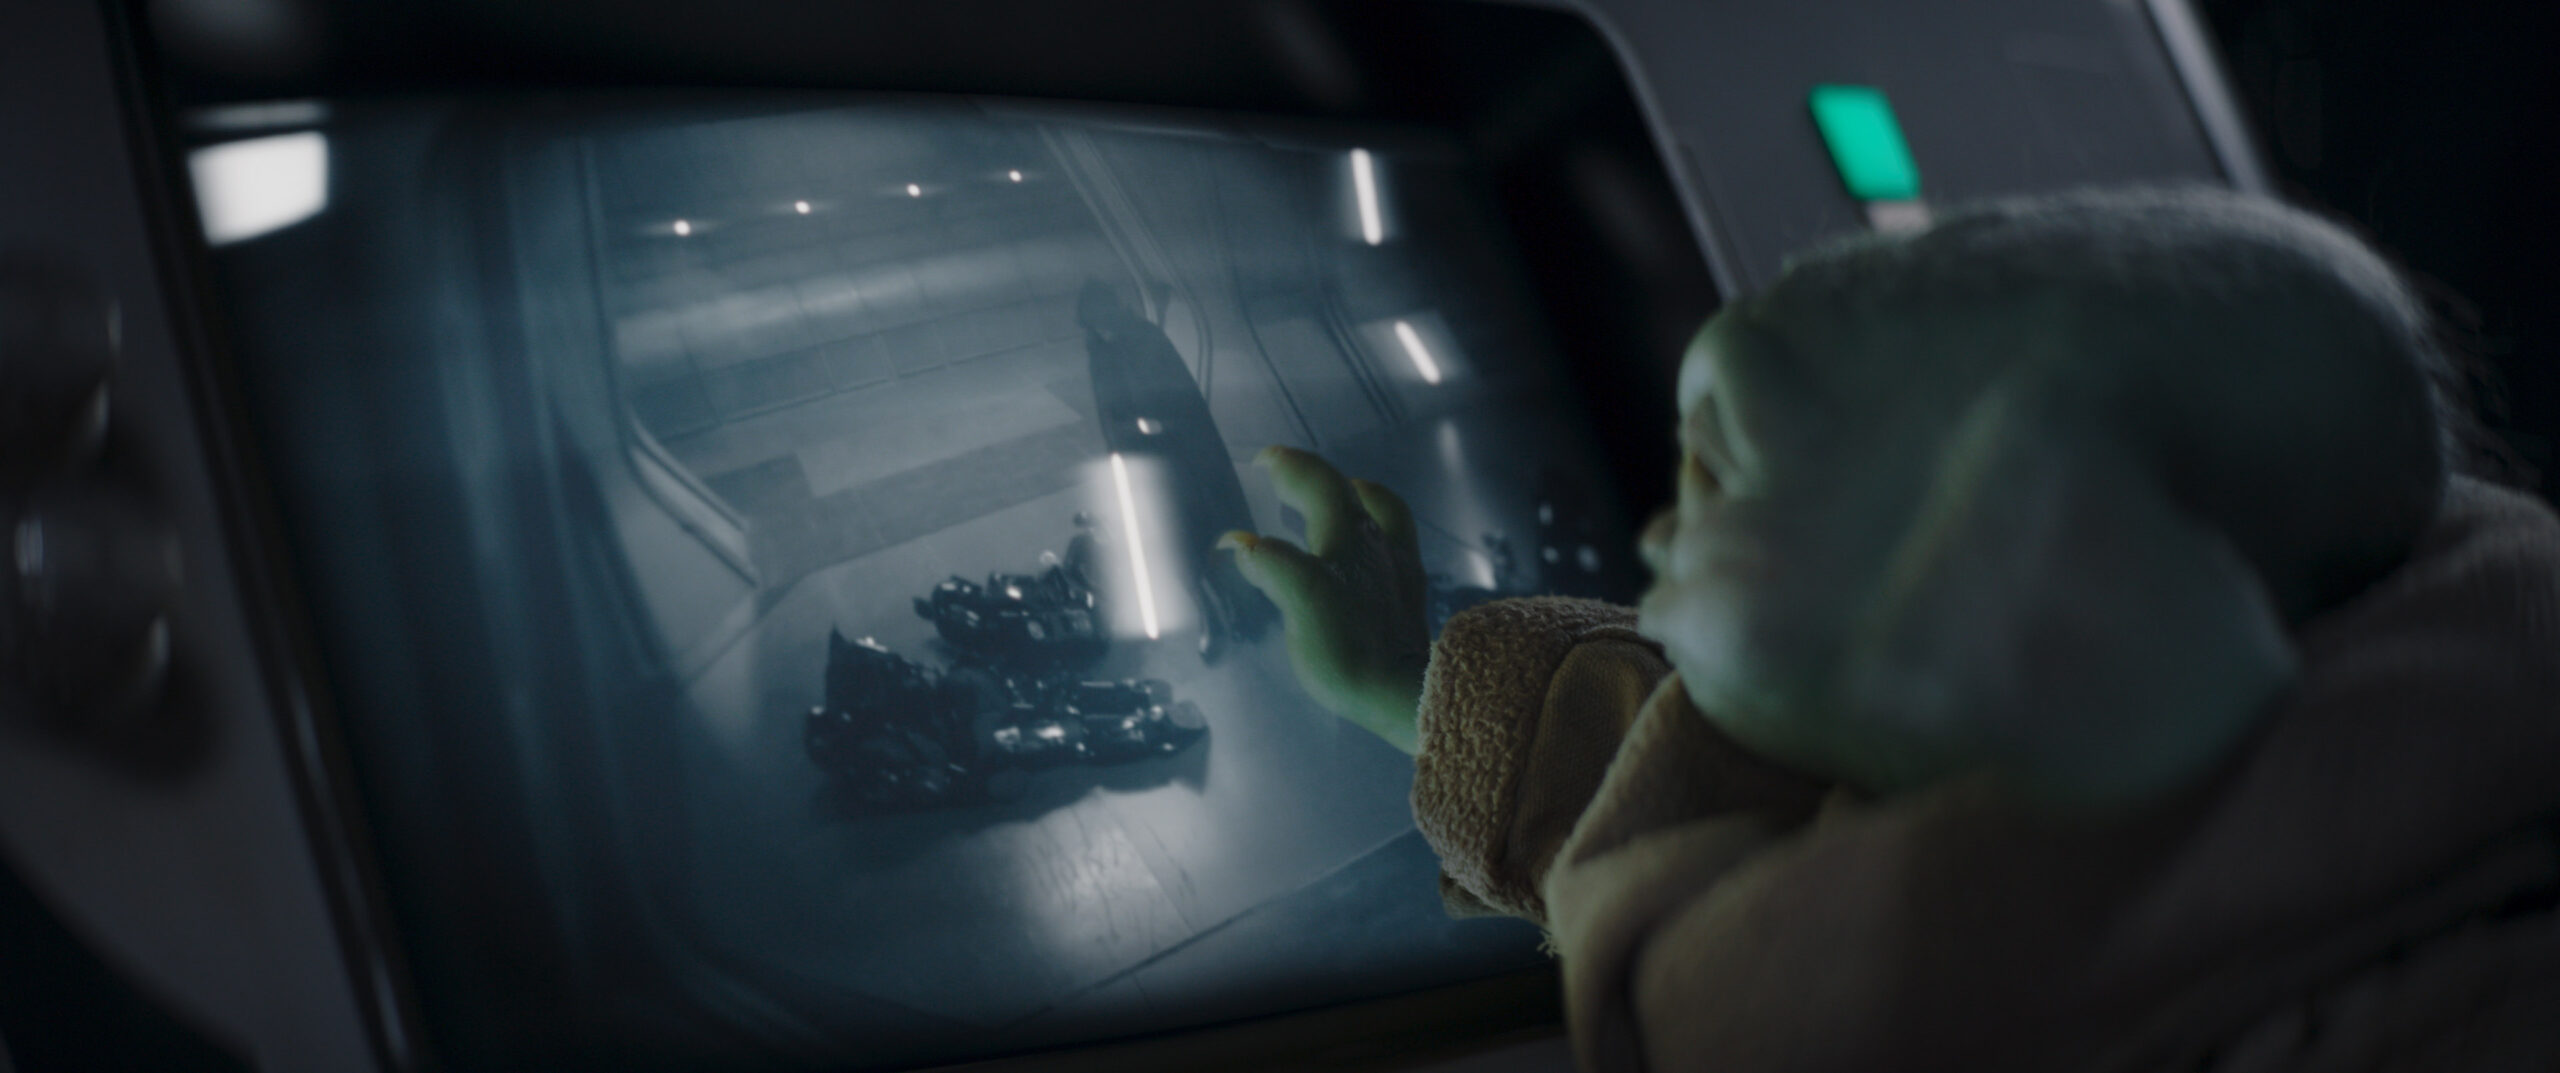 Grogu in Lucasfilm's THE MANDALORIAN, season two, exclusively on Disney+. © 2020 Lucasfilm Ltd. & ™. All Rights Reserved.